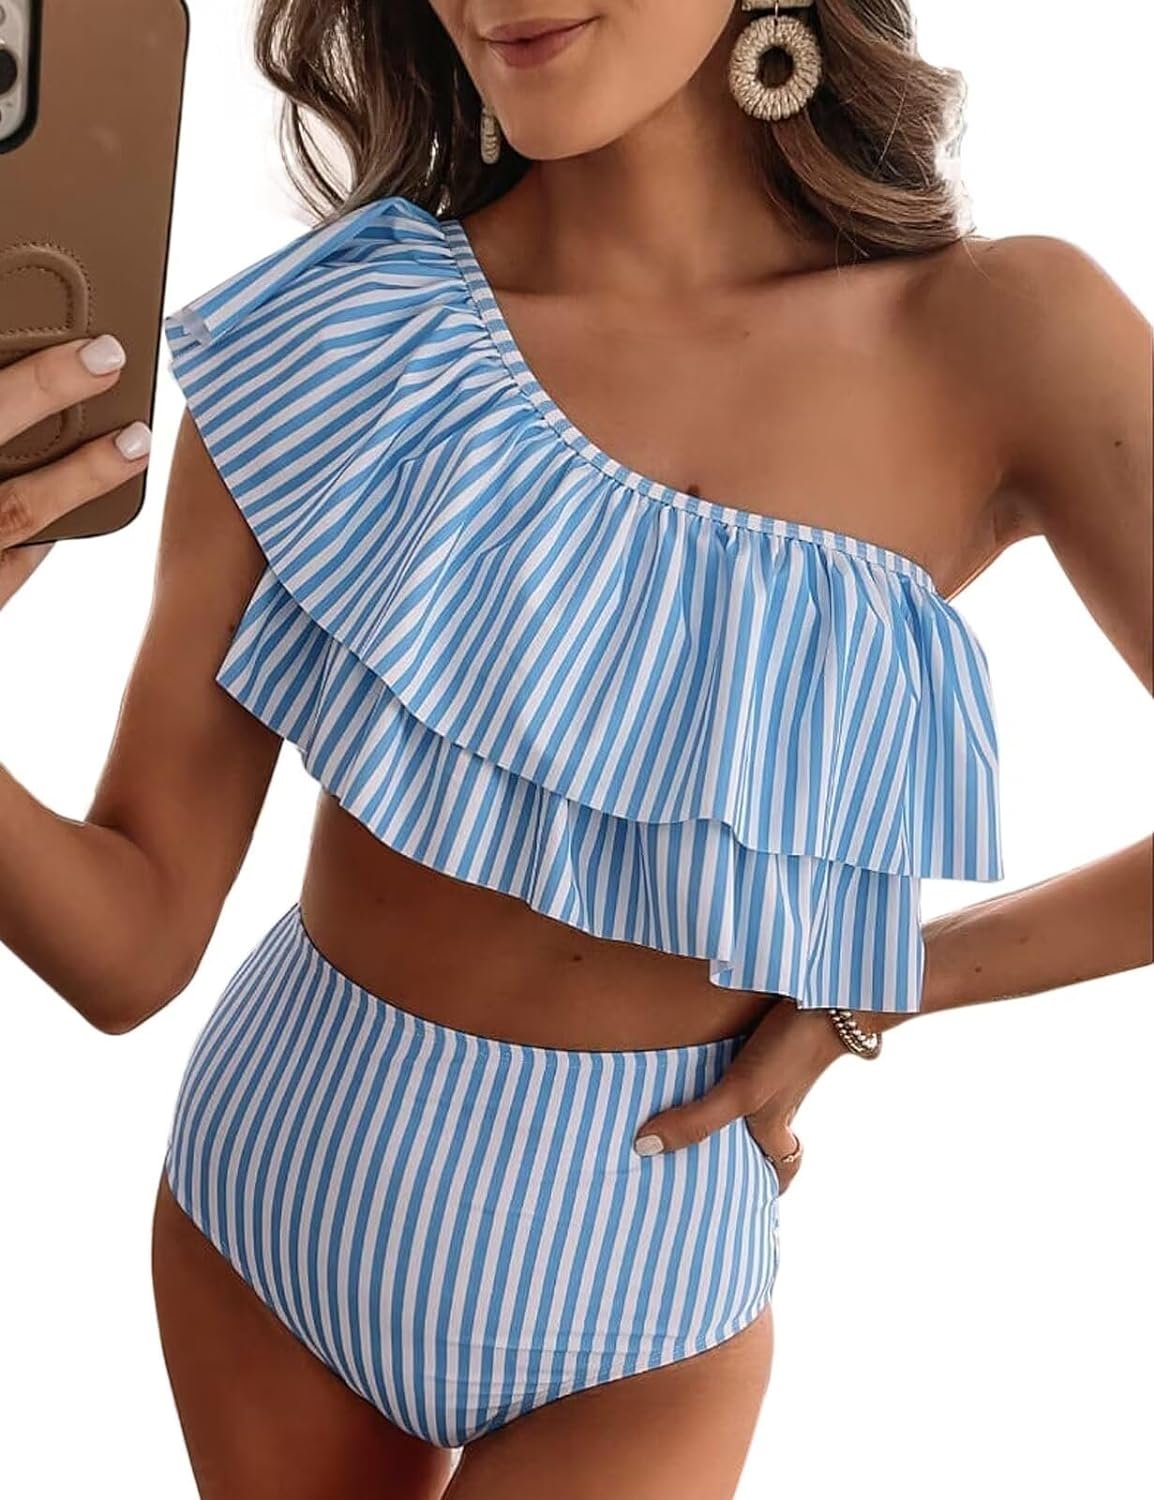 VIMPUNEC Ruffle One Shoulder Swimsuits for Women Cute High Waisted Two Piece Bathing Suits